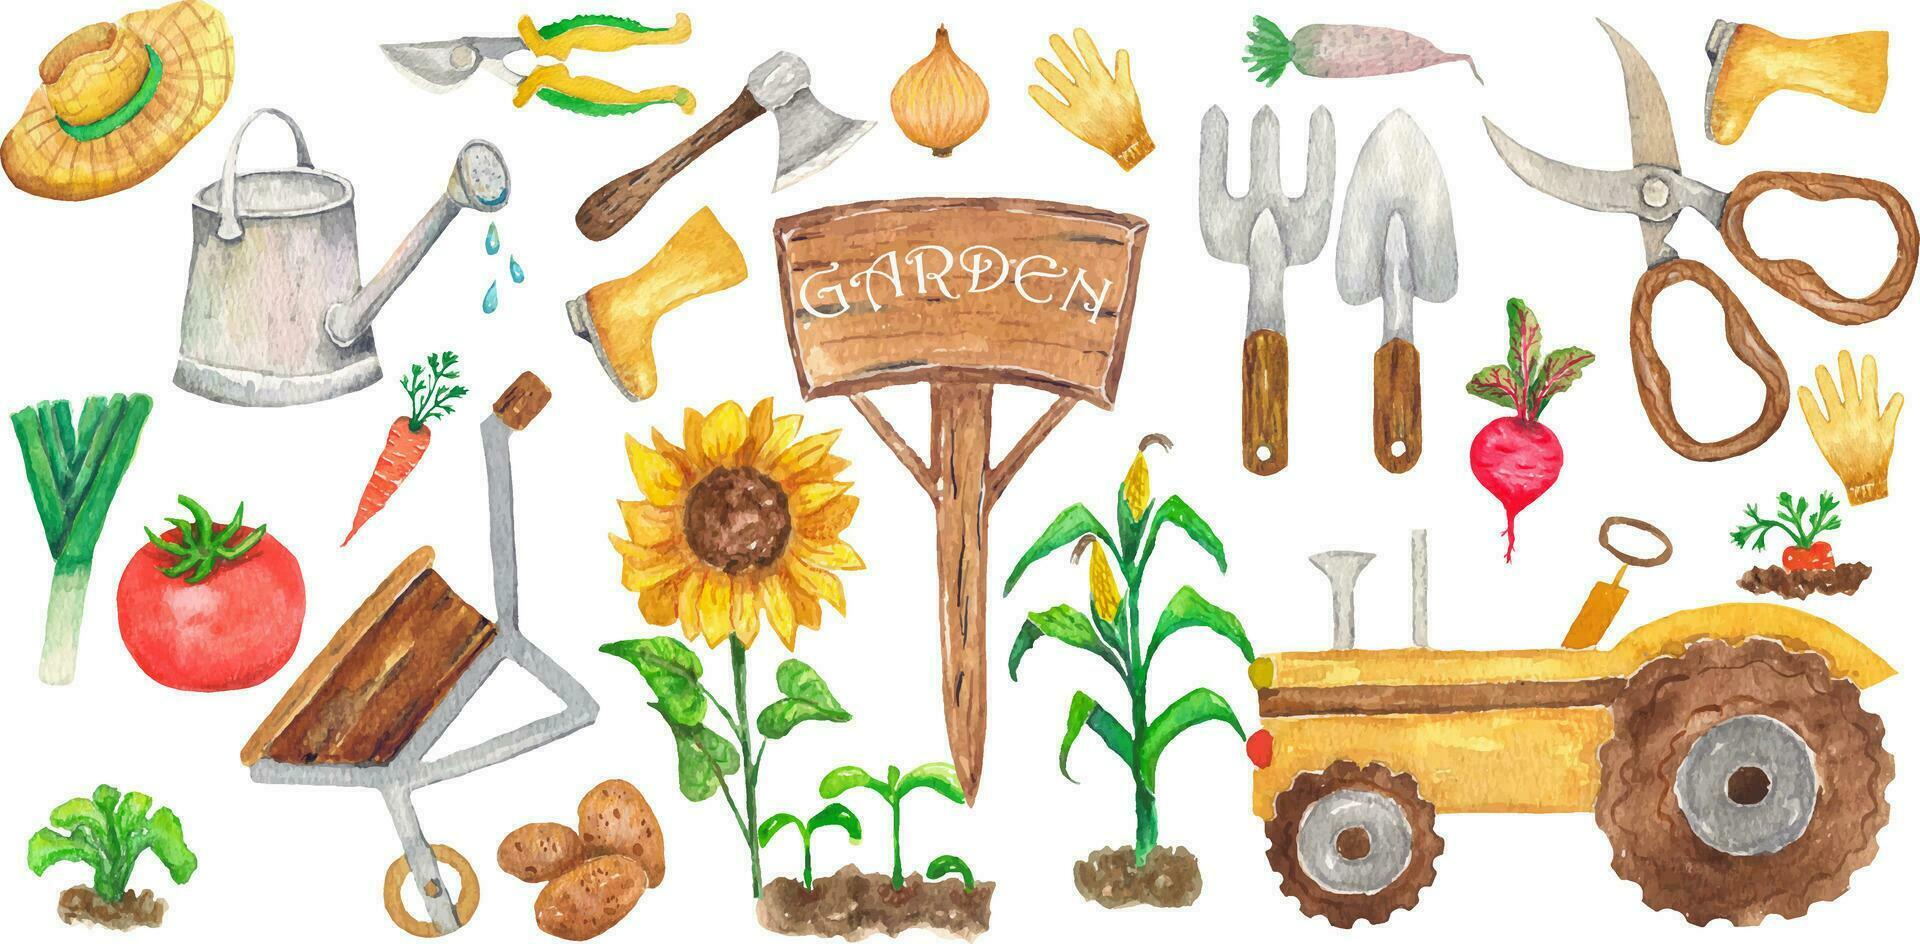 Collection of 26 elements of garden tools and plants. Scissors, hoe, shovel, wheelbarrow, tractor, tomato, seedlings, sunflower, carrot, radish, beet, painted with watercolors. vector